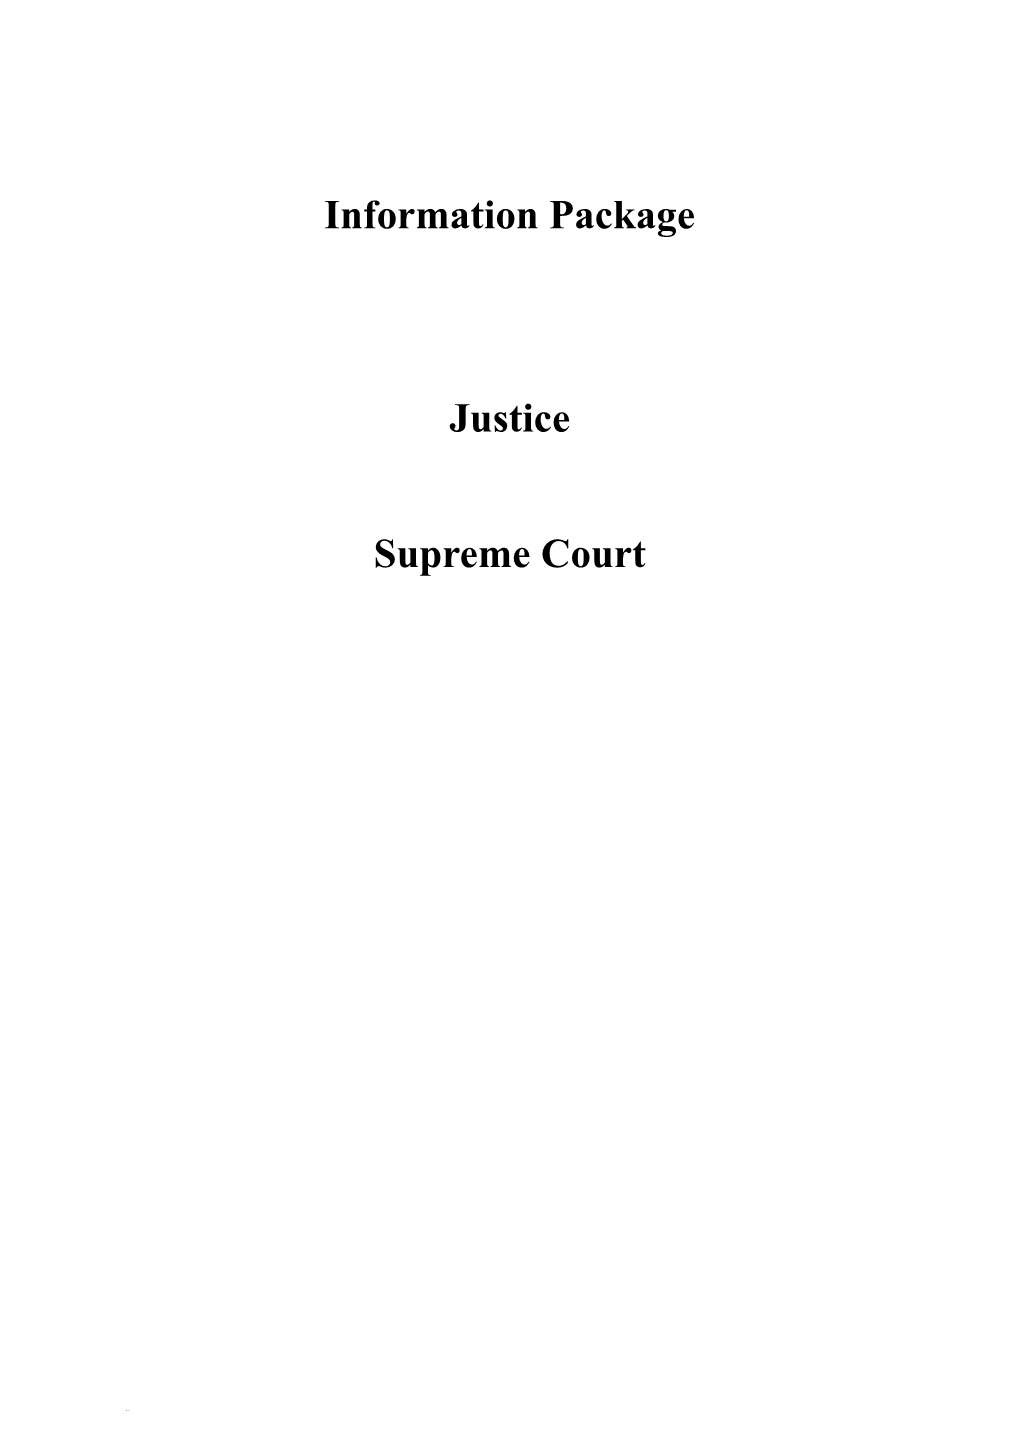 Information Package, Justice Supreme Court